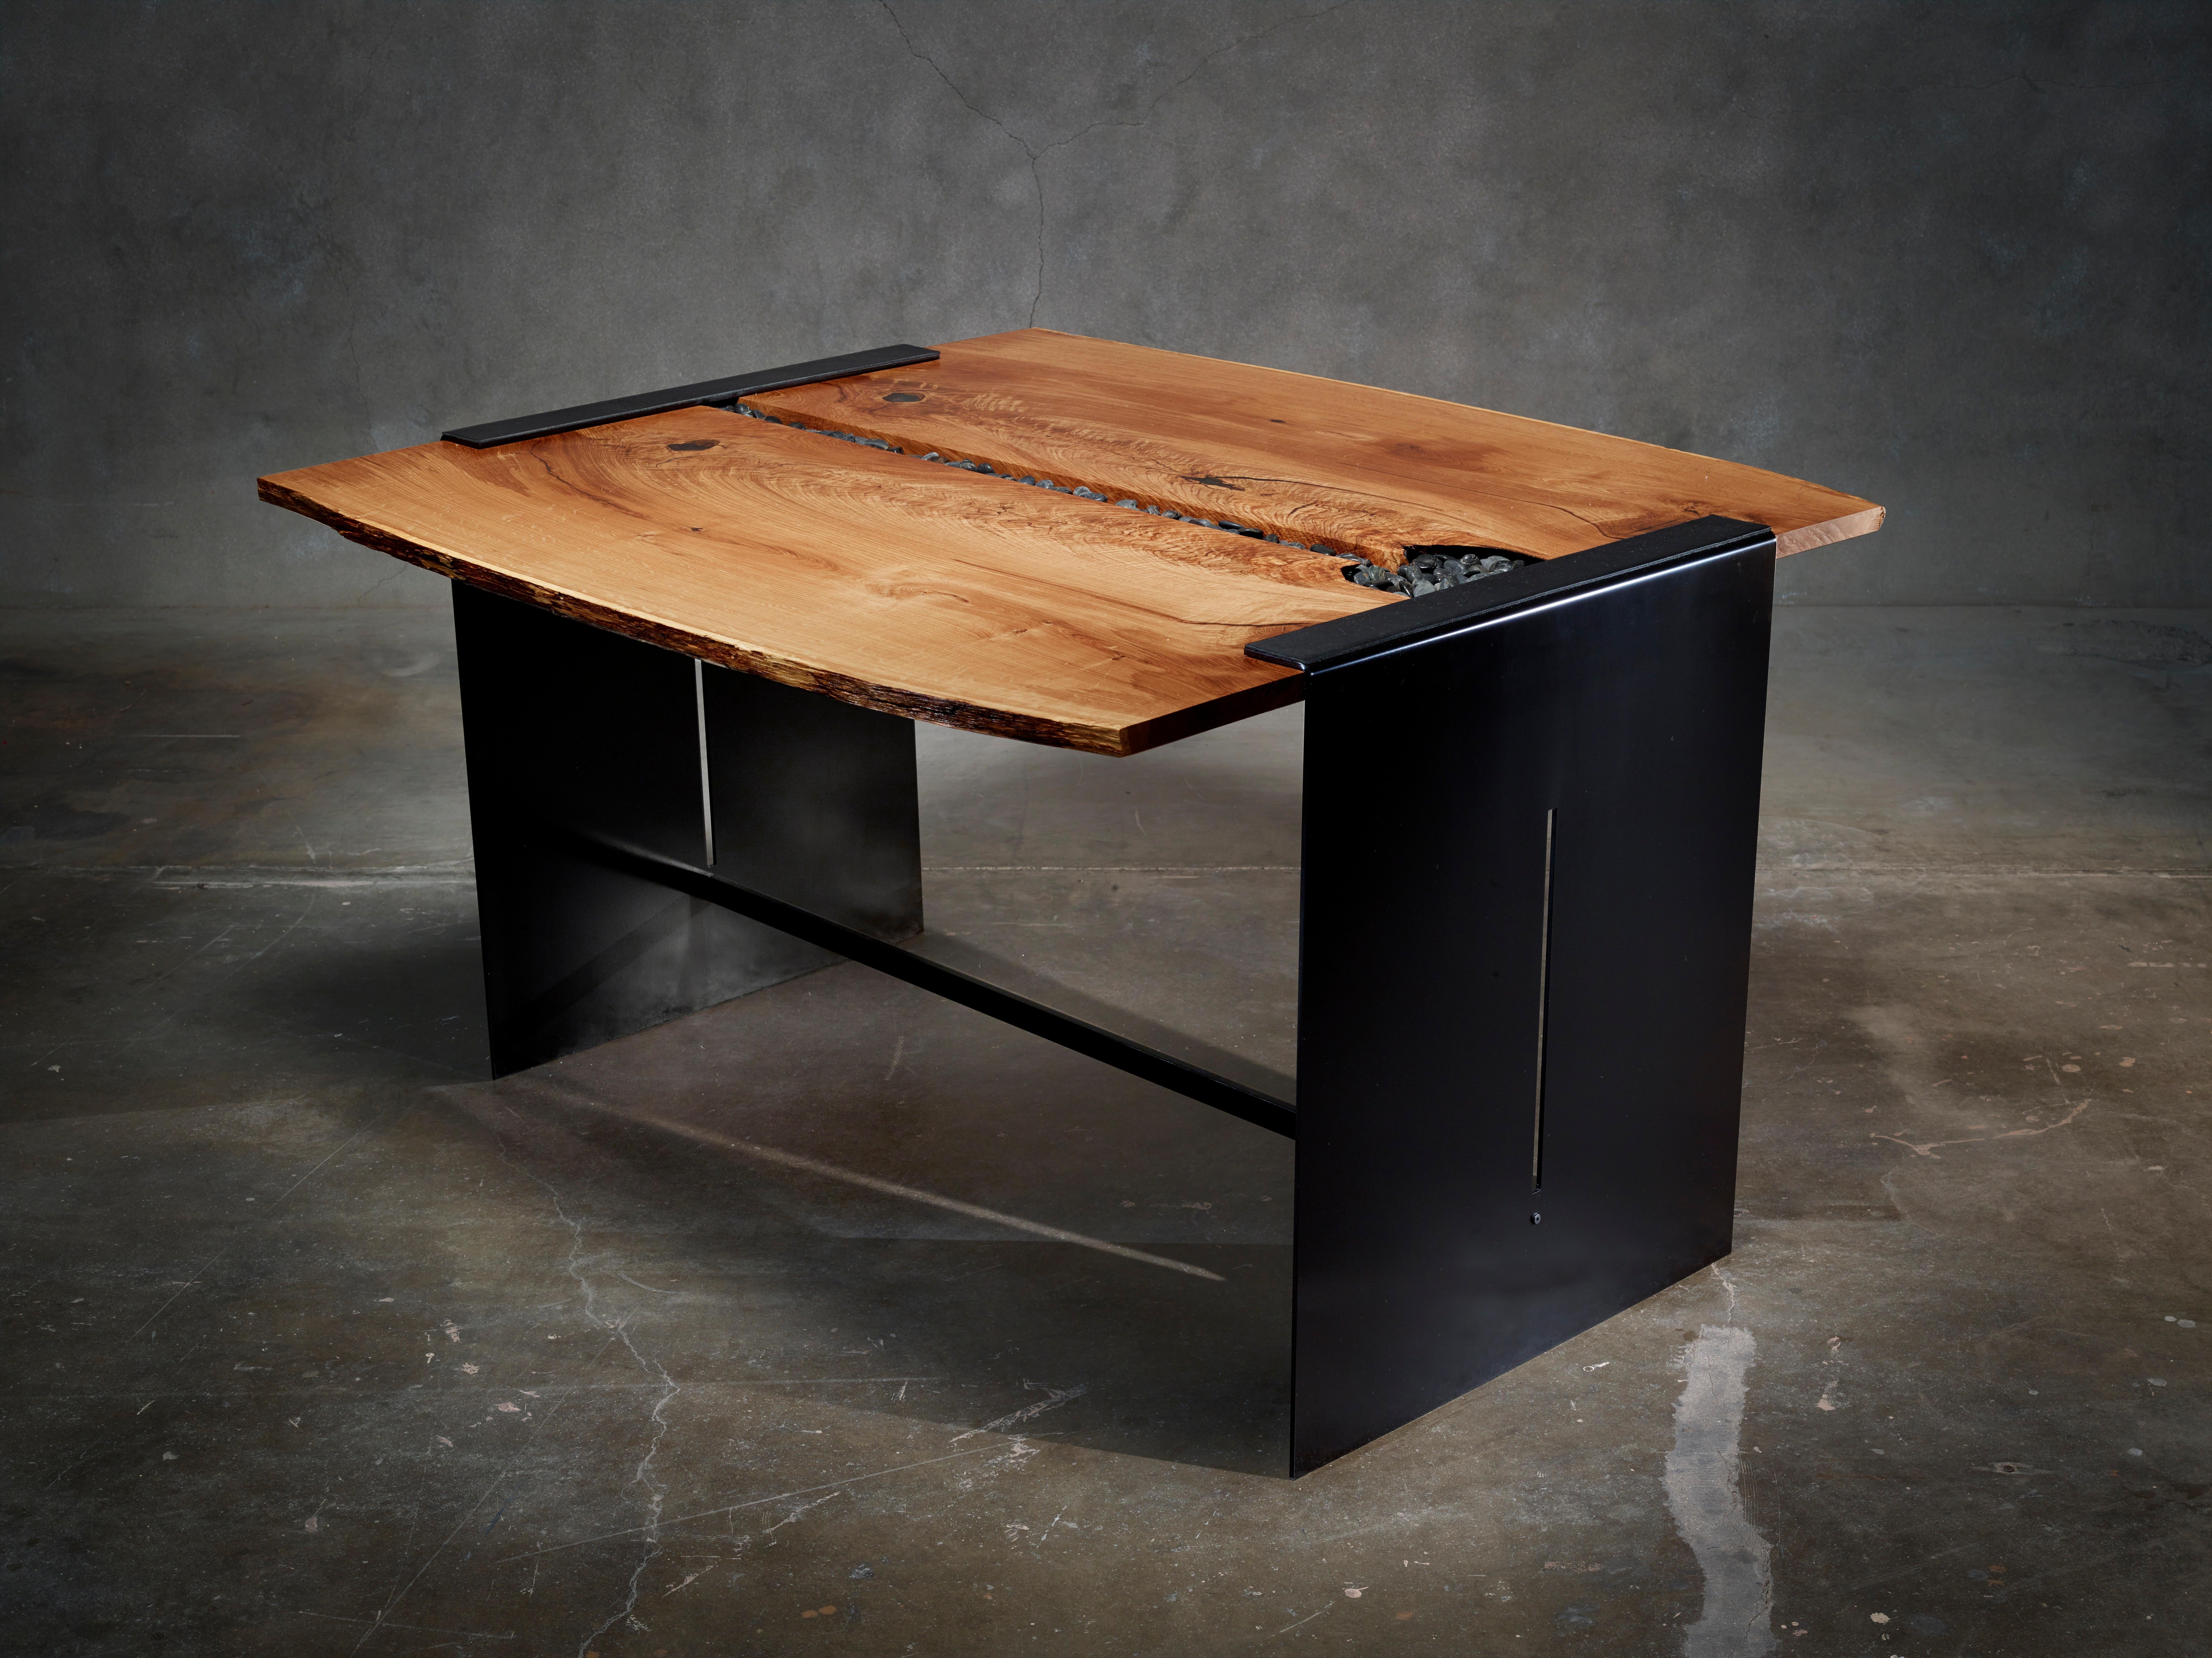 Tranquility dining table is conceived, designed and created by award-winning artist and architectural designer Michael Olshefski of Primal Modern. Inspired by nature and bonsai, this serene dining table showcases a stunning and rare old-growth